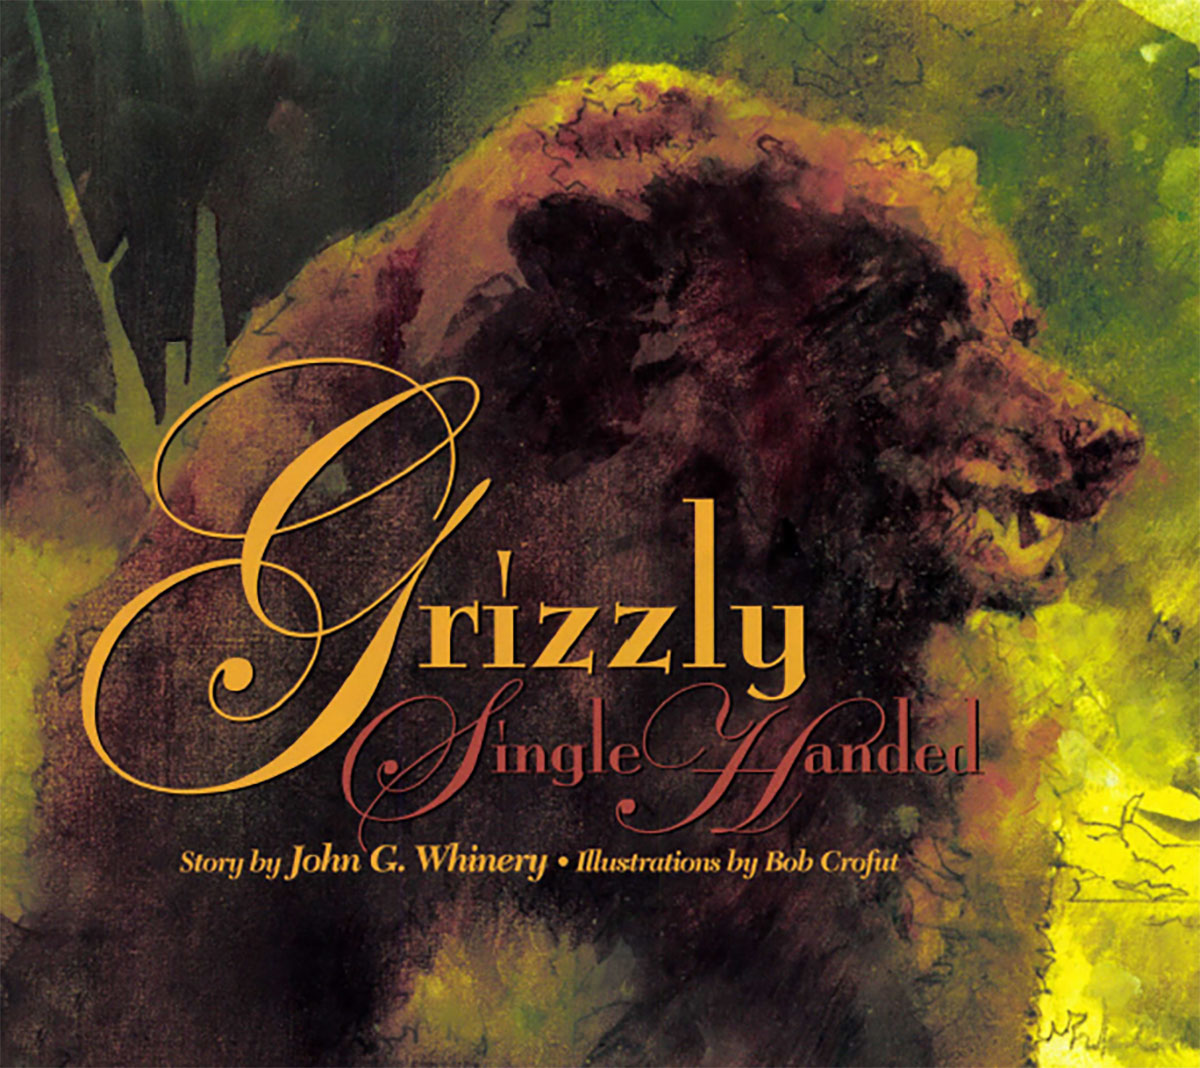 Grizzly Singlehanded